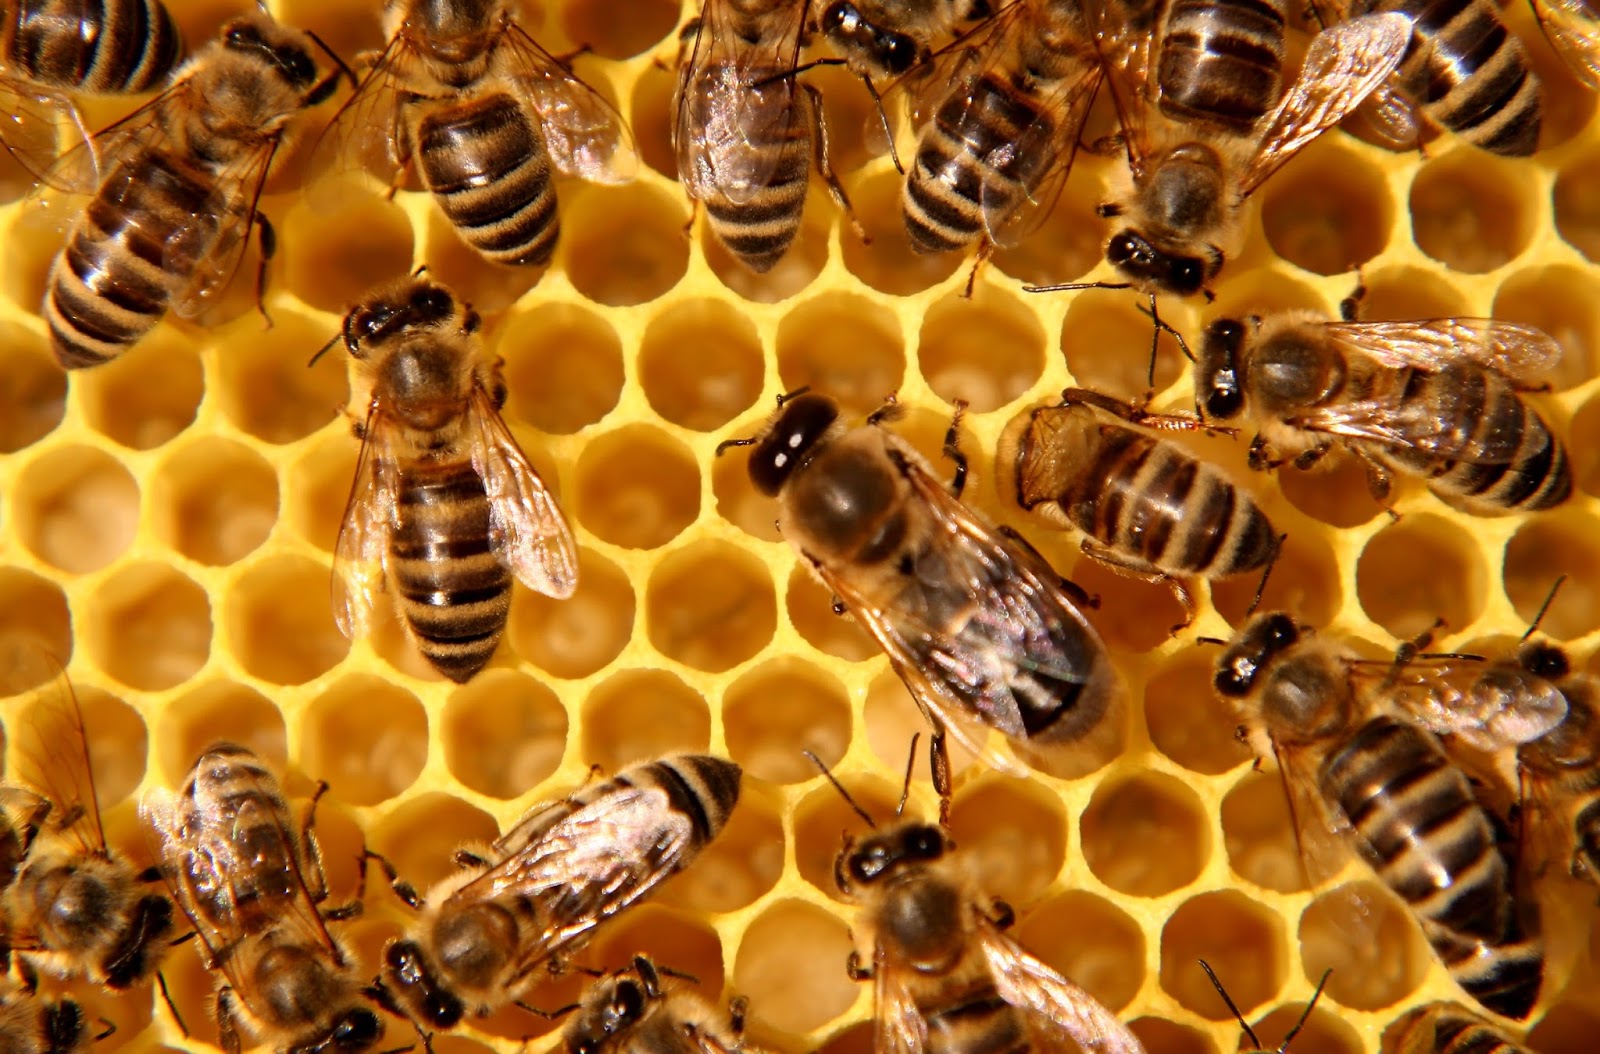 Bees are extremely important to the economy